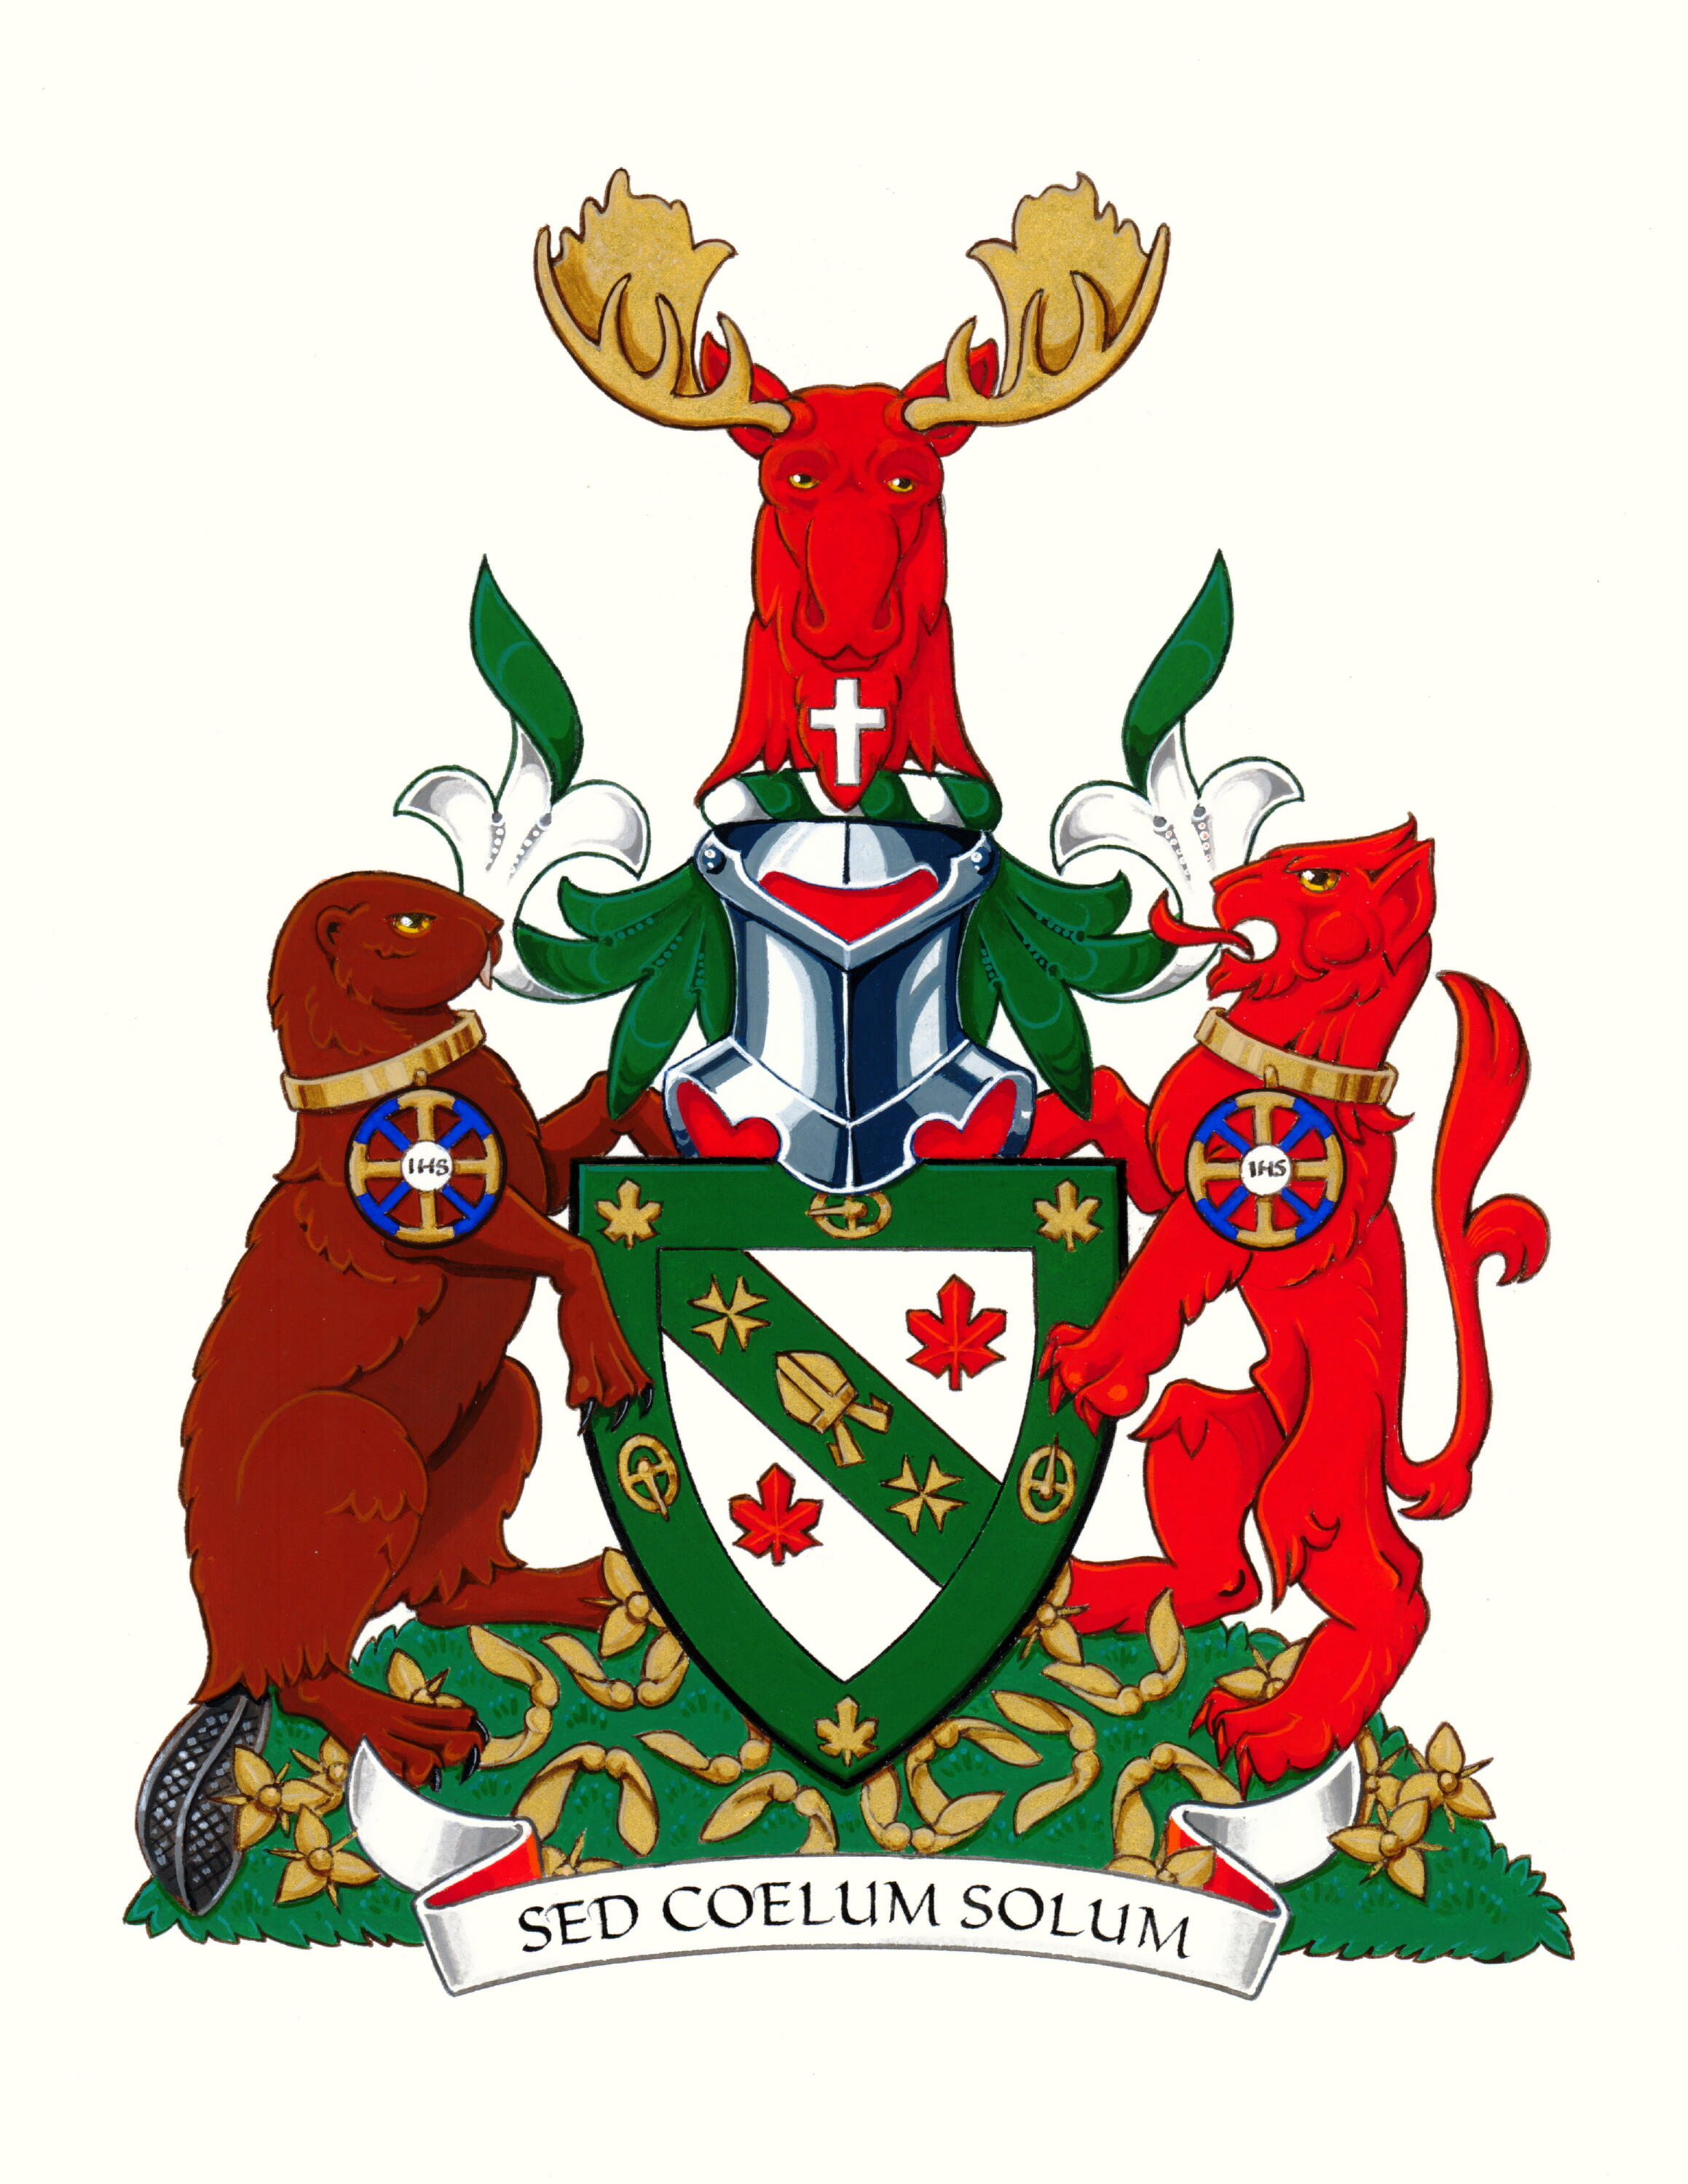 Renison coat of arms, featuring a moose at the top, beaver on the left, and lion on the right.